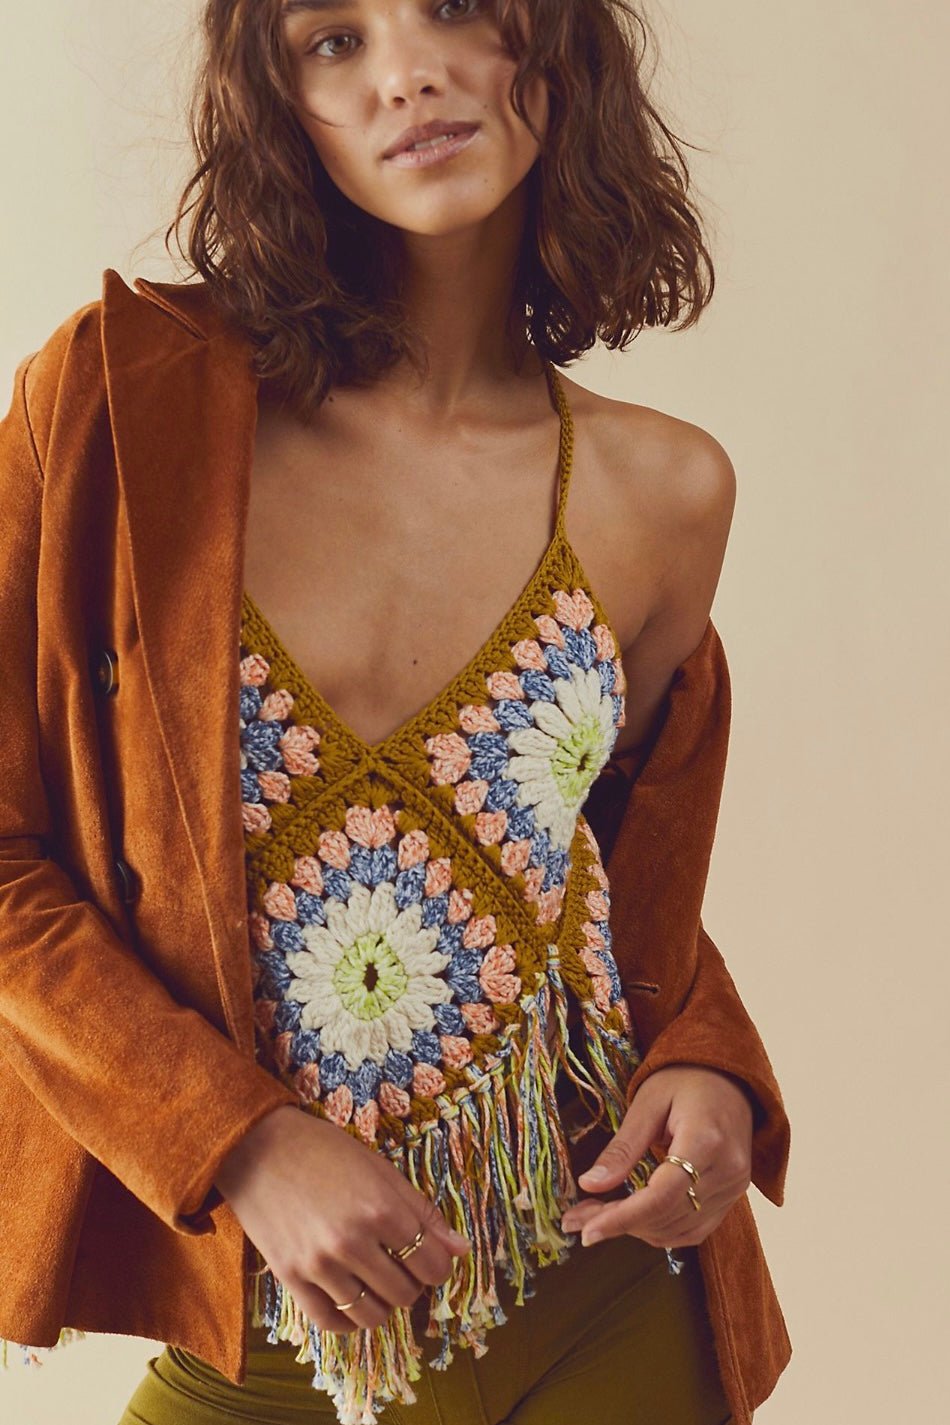 SUMMER OF LOVE HALTER TOP X FREE PEOPLE - sustainably made MOMO NEW YORK sustainable clothing, crochet slow fashion